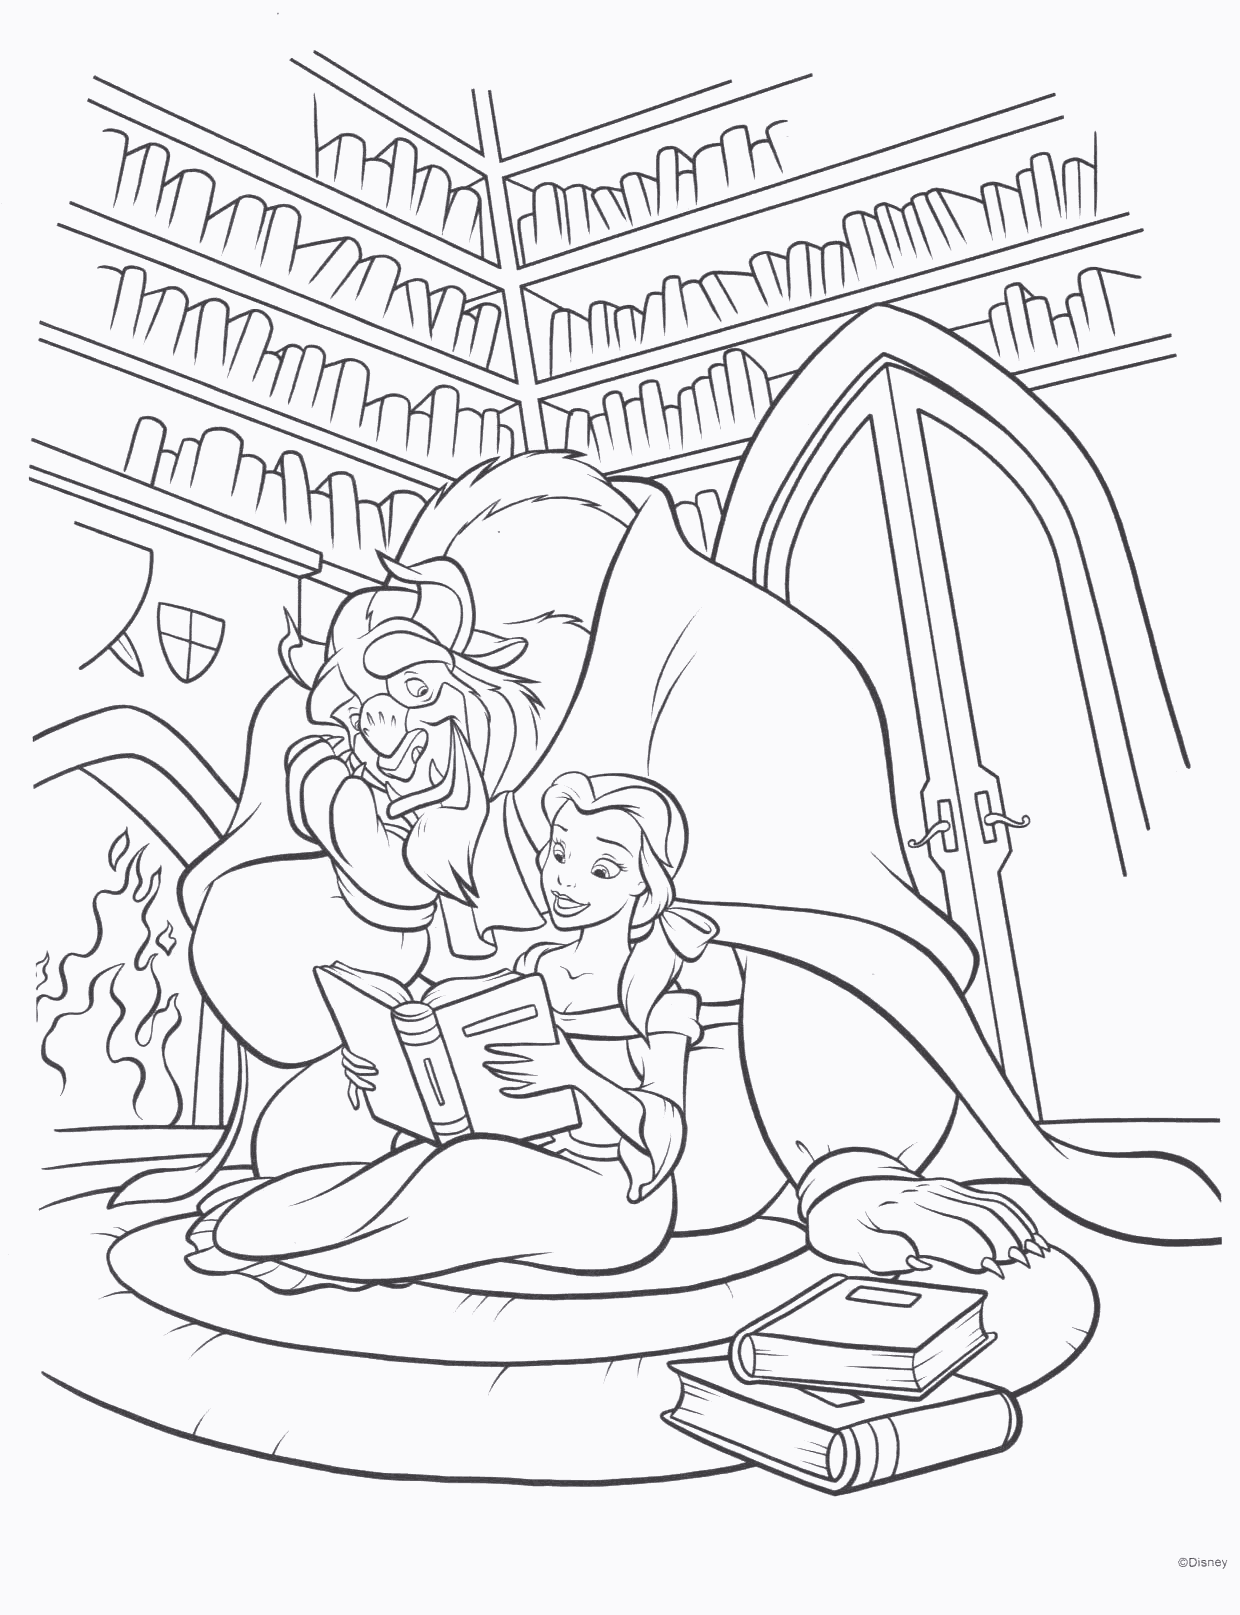 Color Pages Free Download Archives - Page 22 of 49 - Coloring Pages